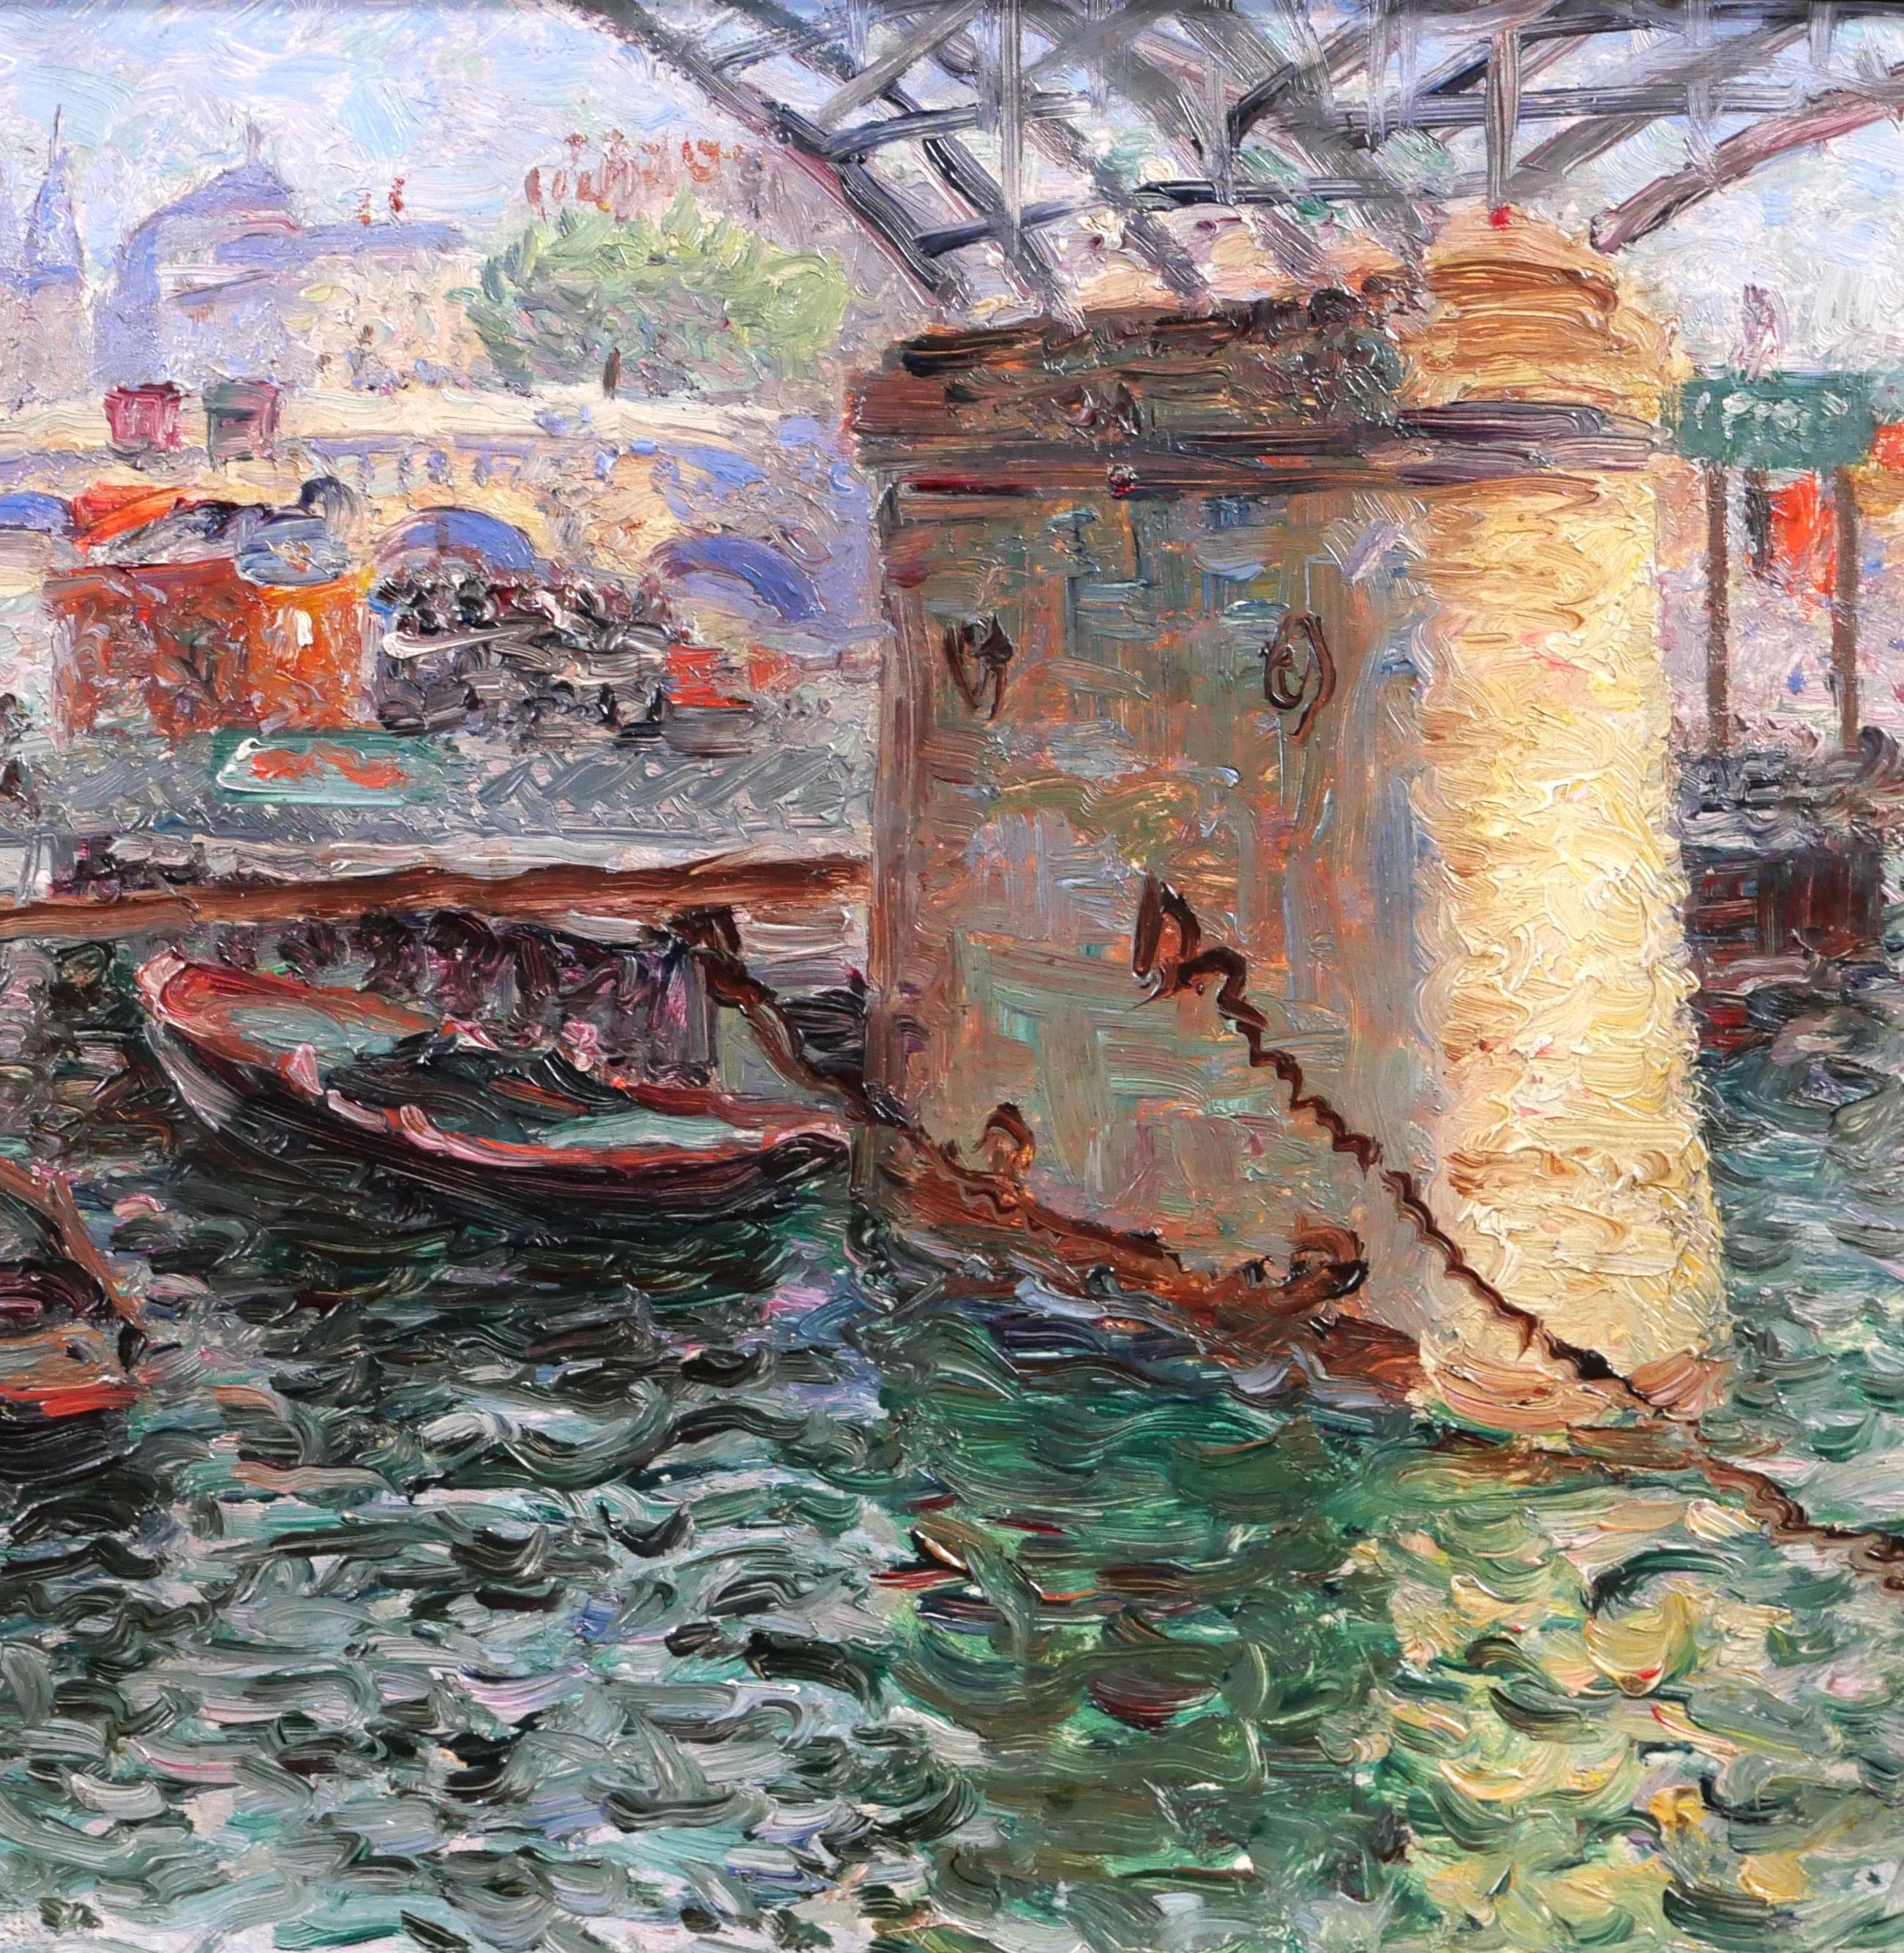 Edouard Jean DAMBOURGEZ
1844-1931
Paris, the Seine under the arts bridge
Painting, oil on cardboard
Signed
Painting: 19 x 24 cm (7.5 x 9.4 inches)
Frame: 28 x 33 cm (11 x 13 inches)
Very good condition
Circa 1900